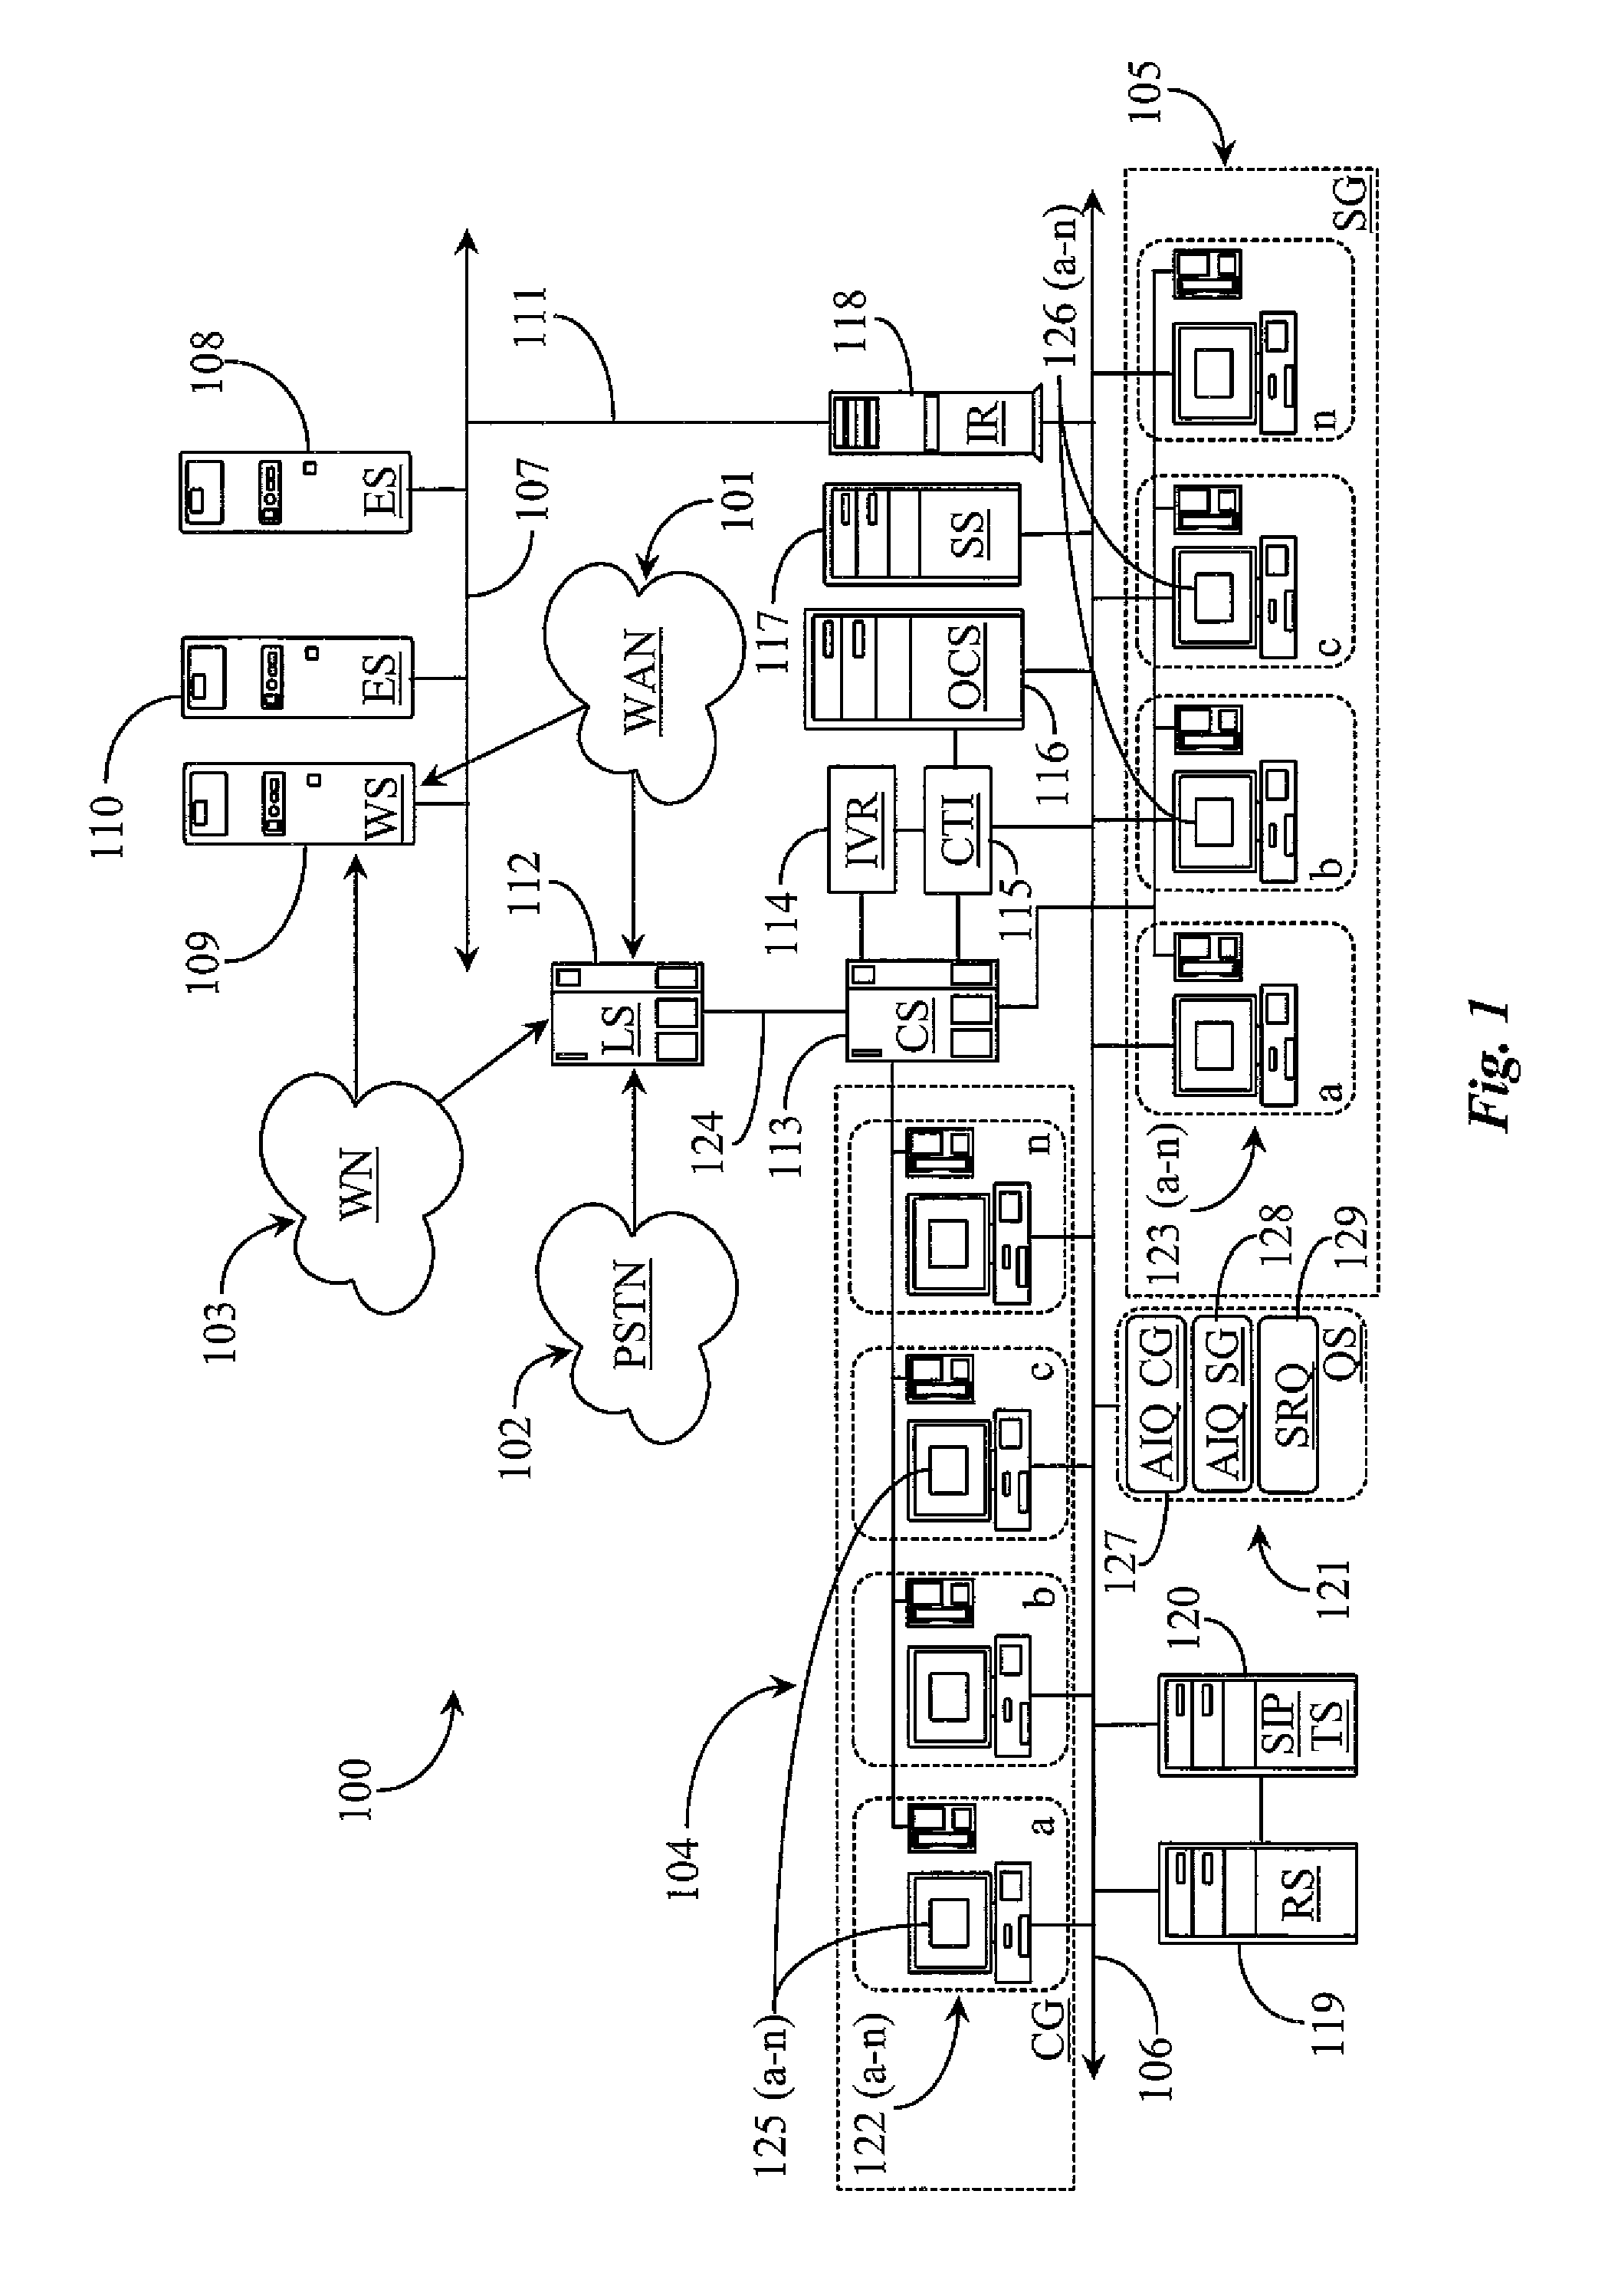 Multimedia routing system for securing third party participation in call consultation or call transfer of a call in Progress